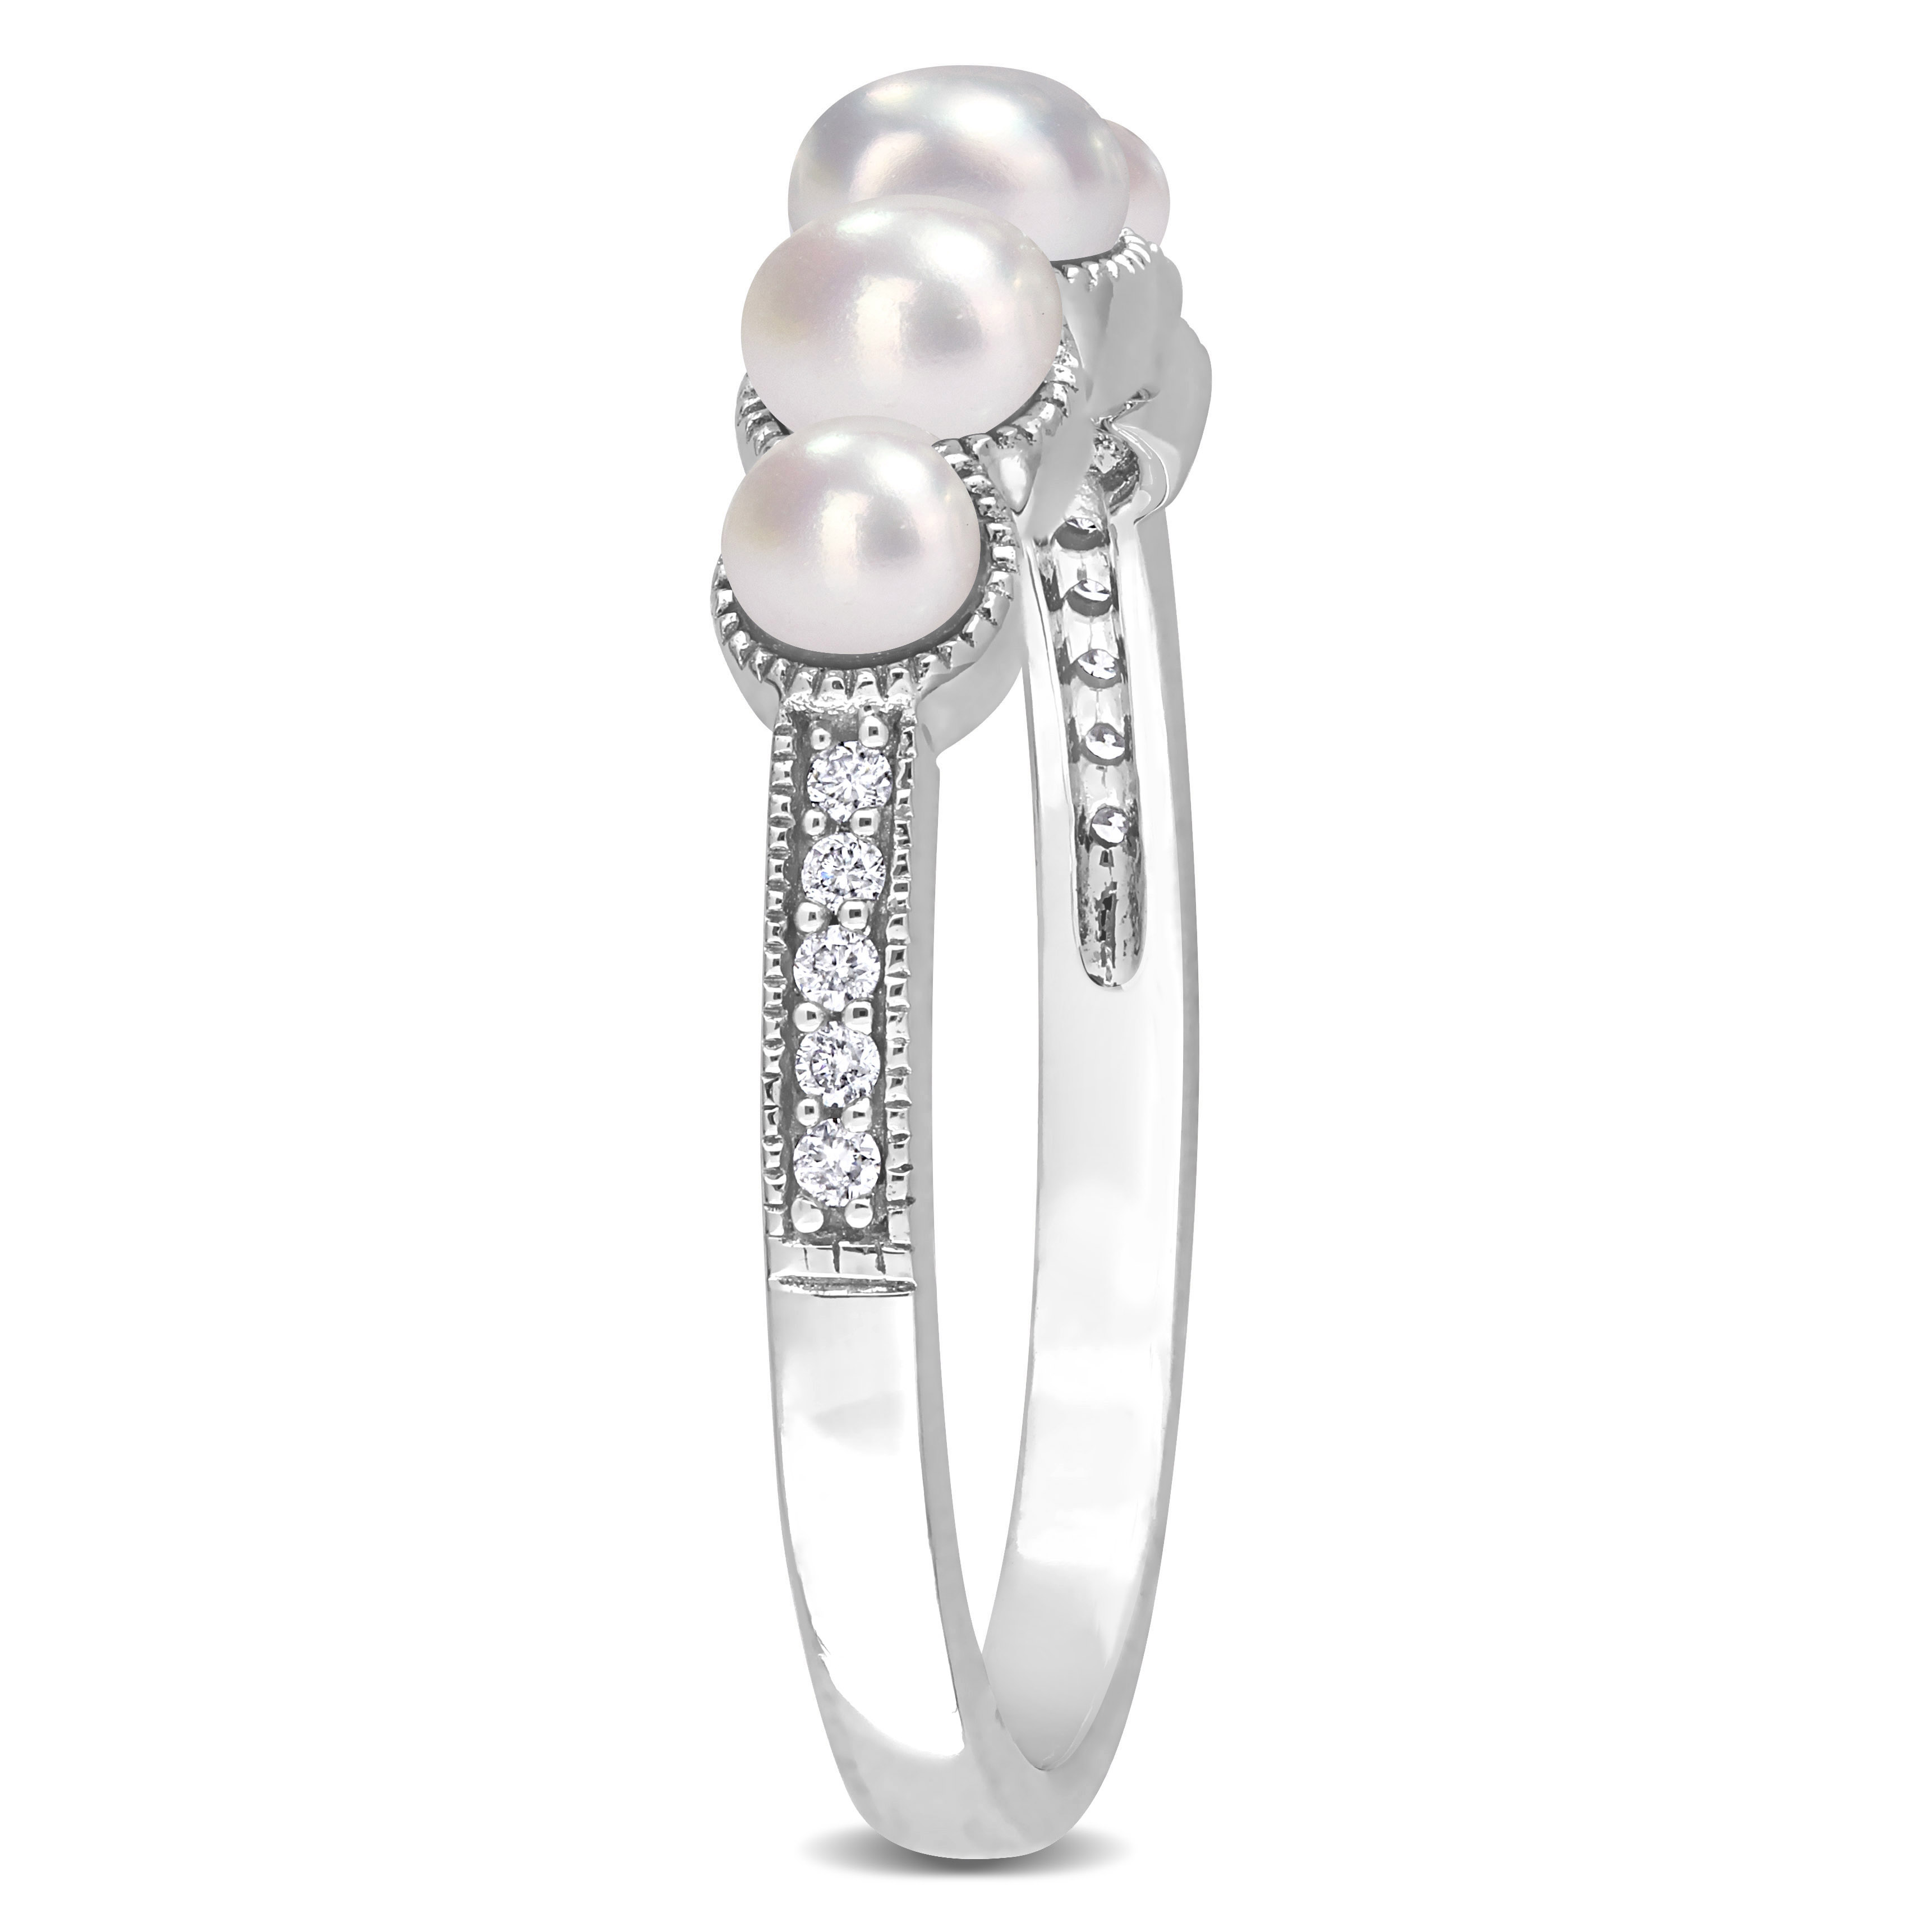 Cultured Freshwater Pearl and Diamond Accent Halo Five Stone Ring in 14k White Gold